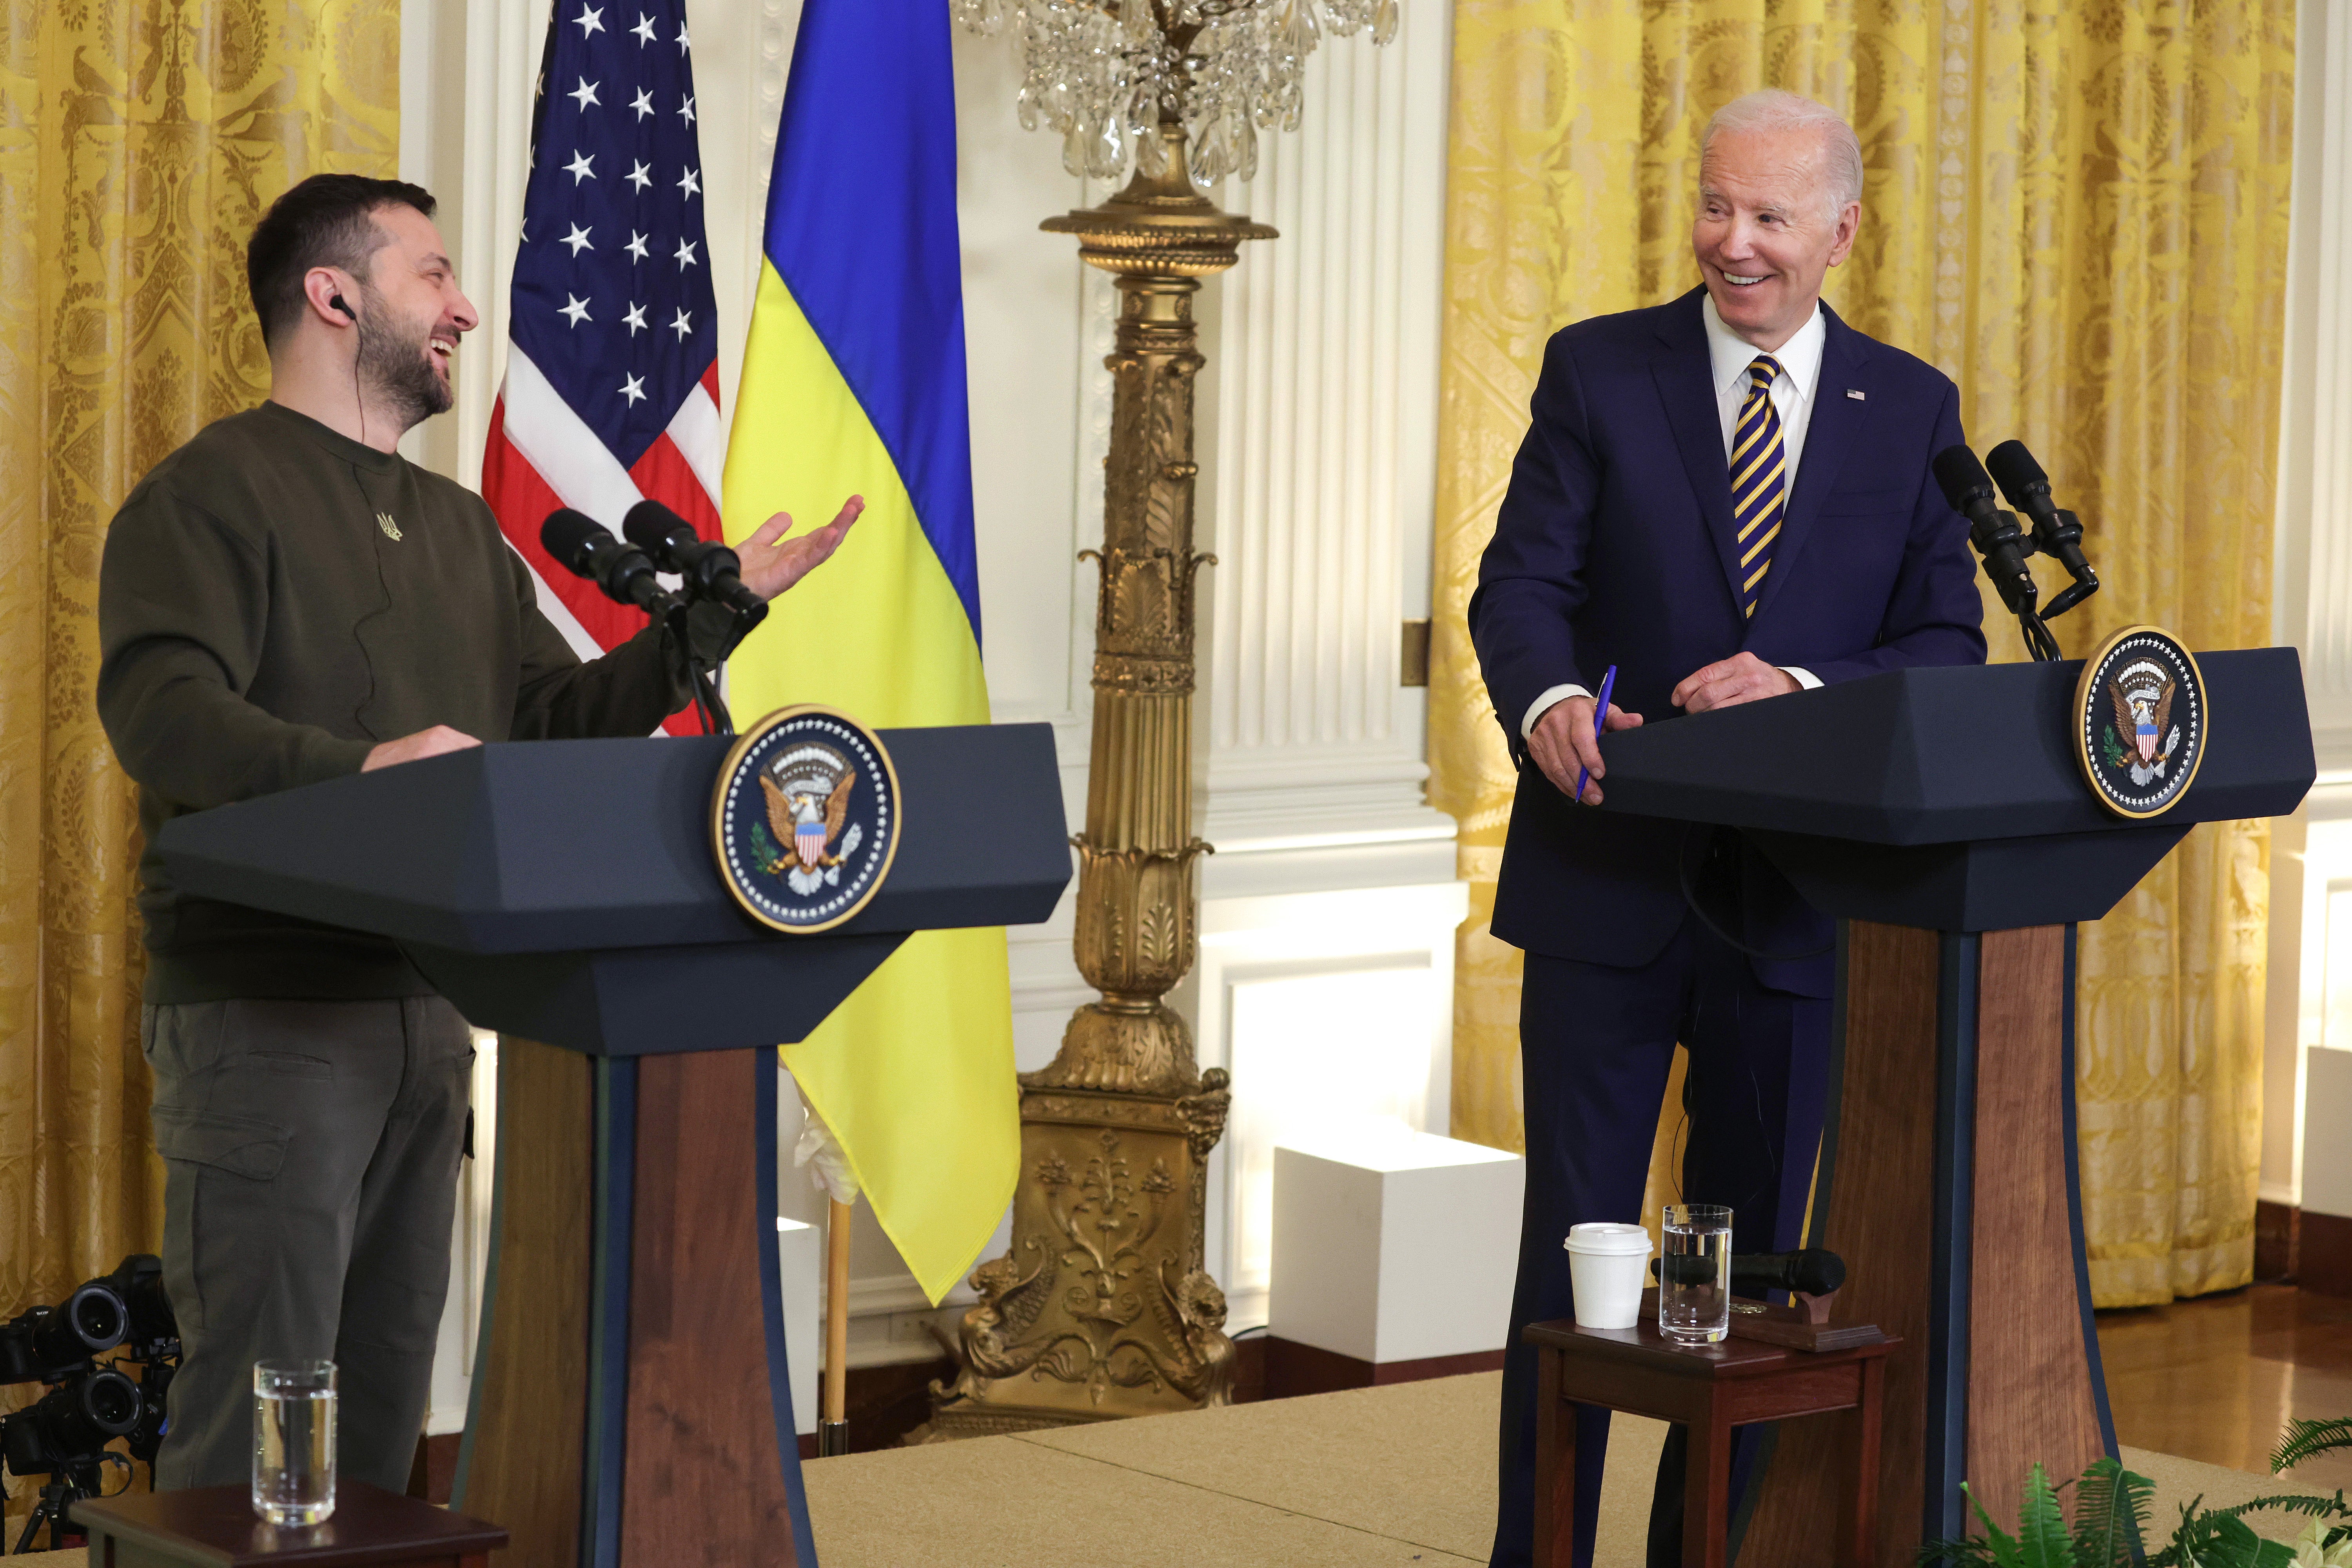 Joe Biden and Volodymyr Zelensky held a joint press conference in the East Room at the White House